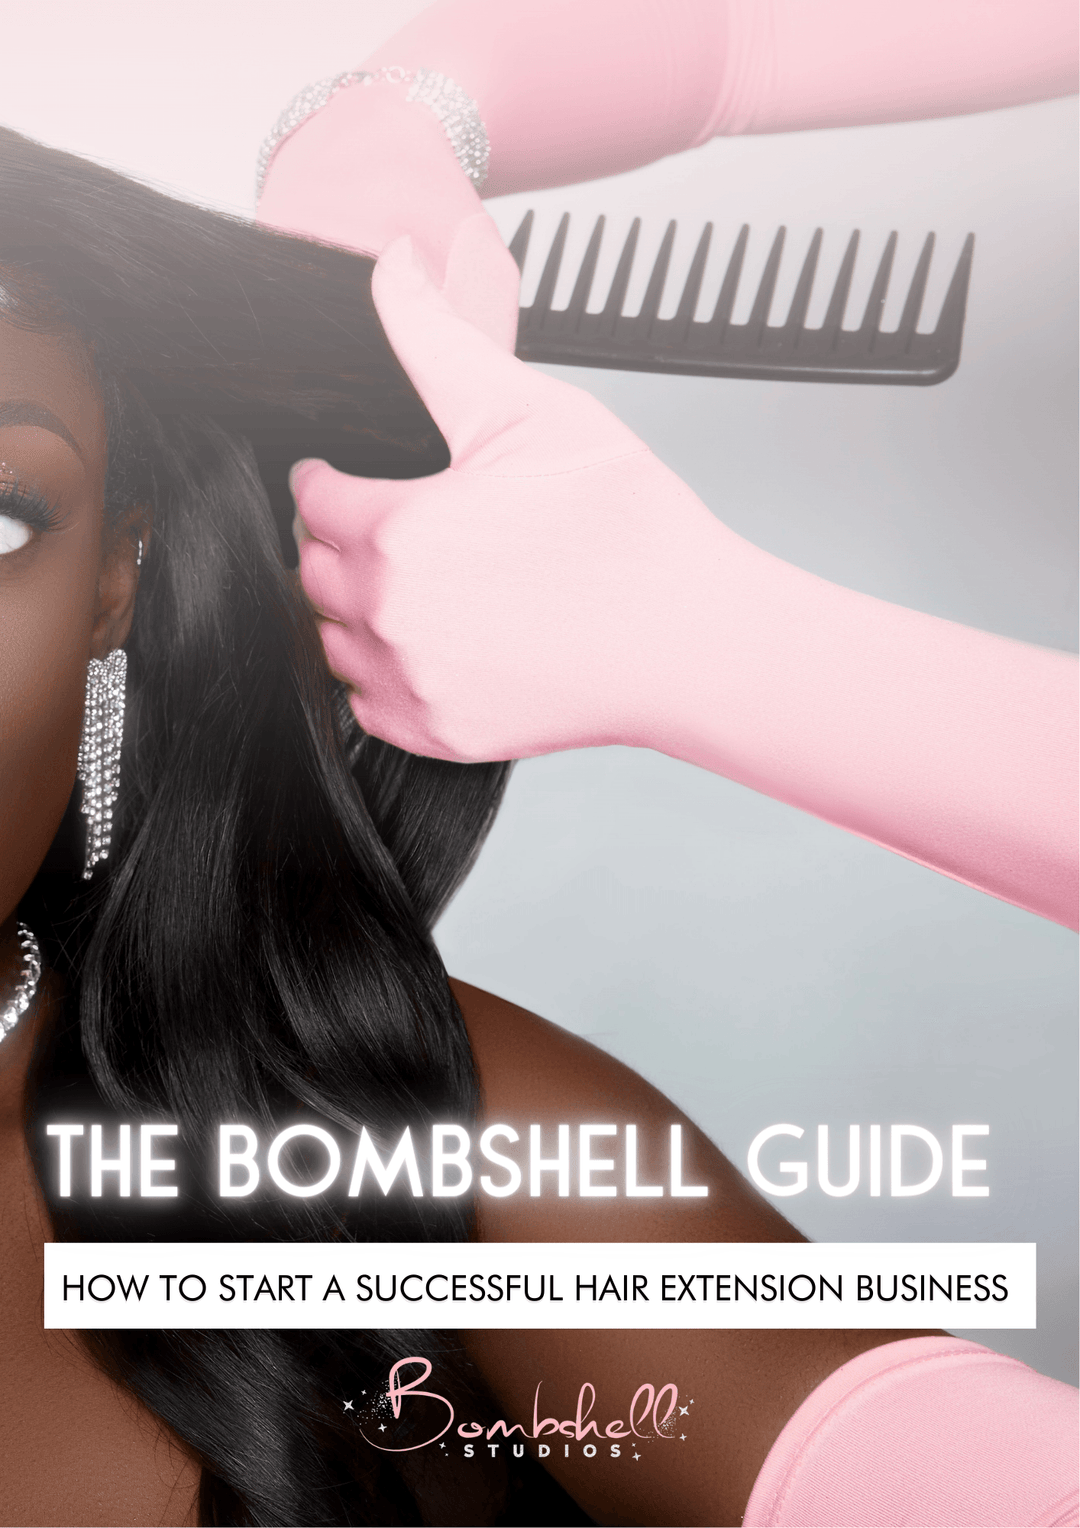 The Bombshell Guide: How to start a successful hair extension business